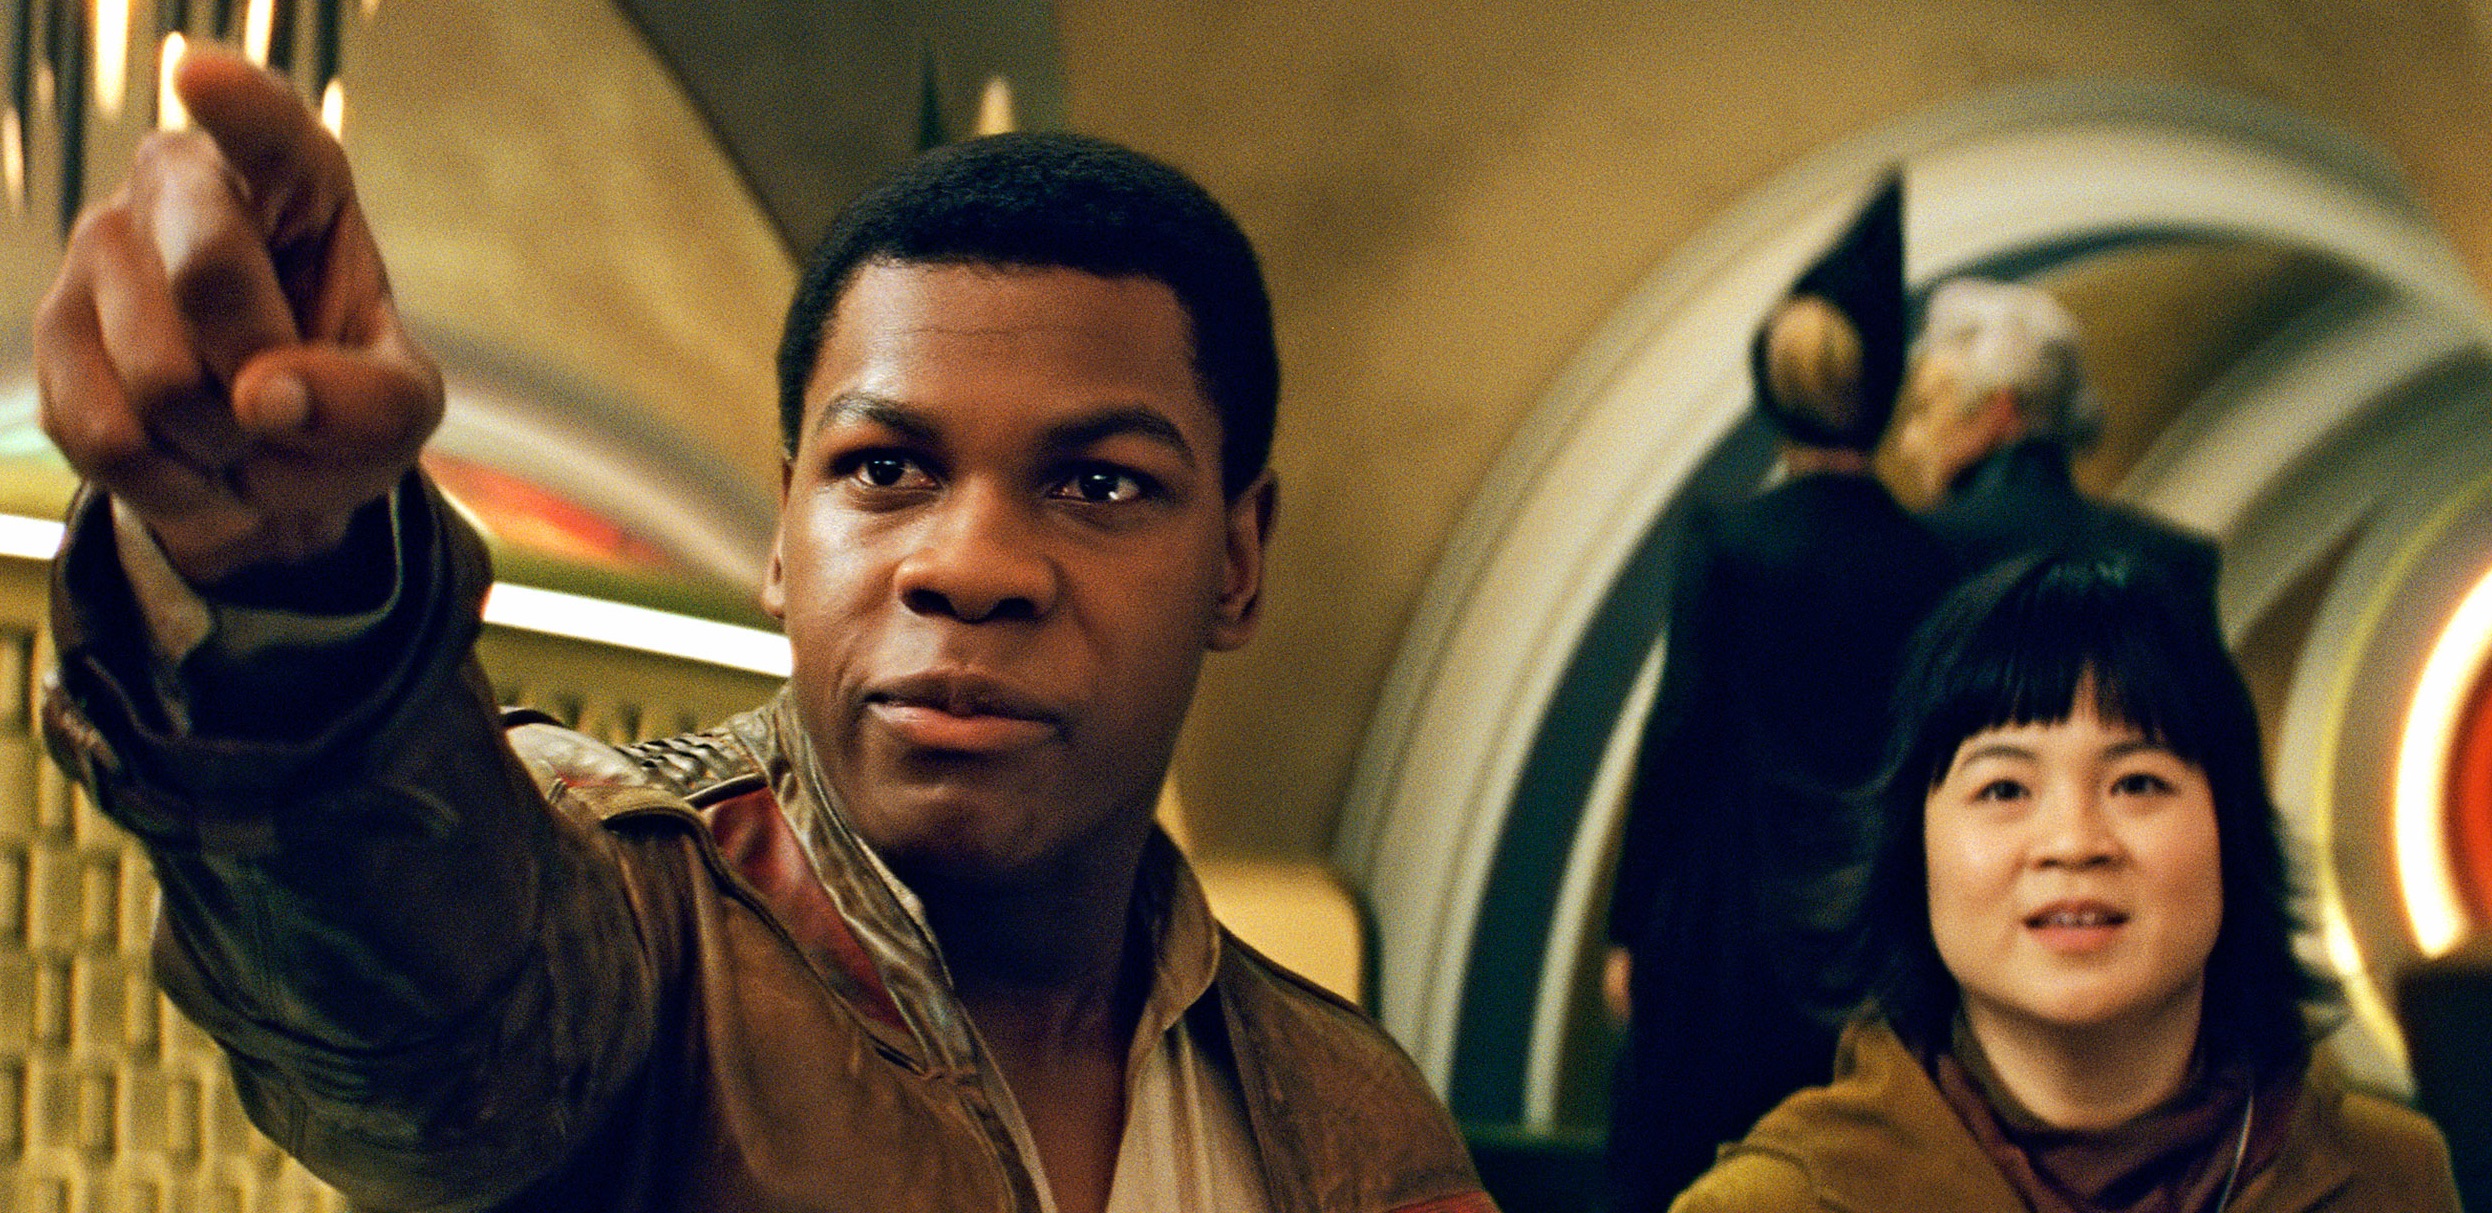 The One Thing John Boyega Hates About Filming With Rian Johnson